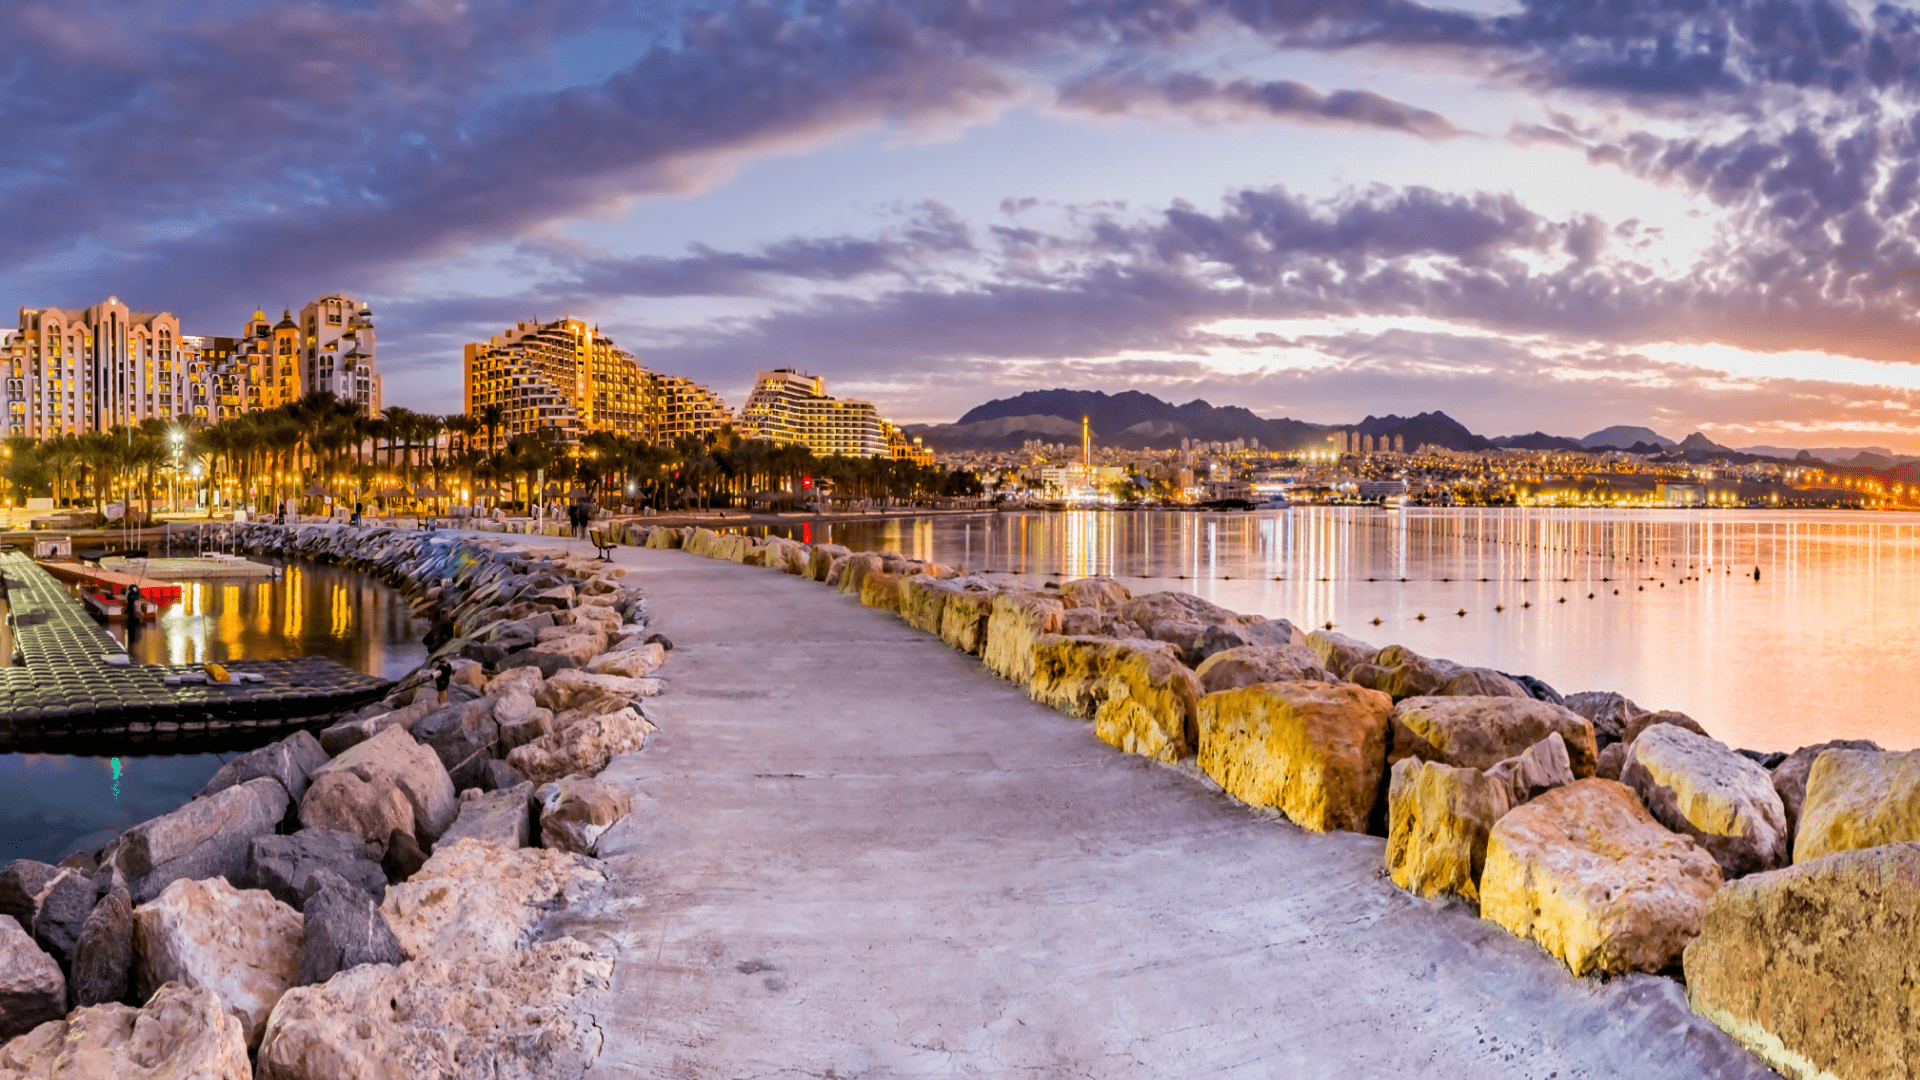 Background picture - view of the hotels of Eilat